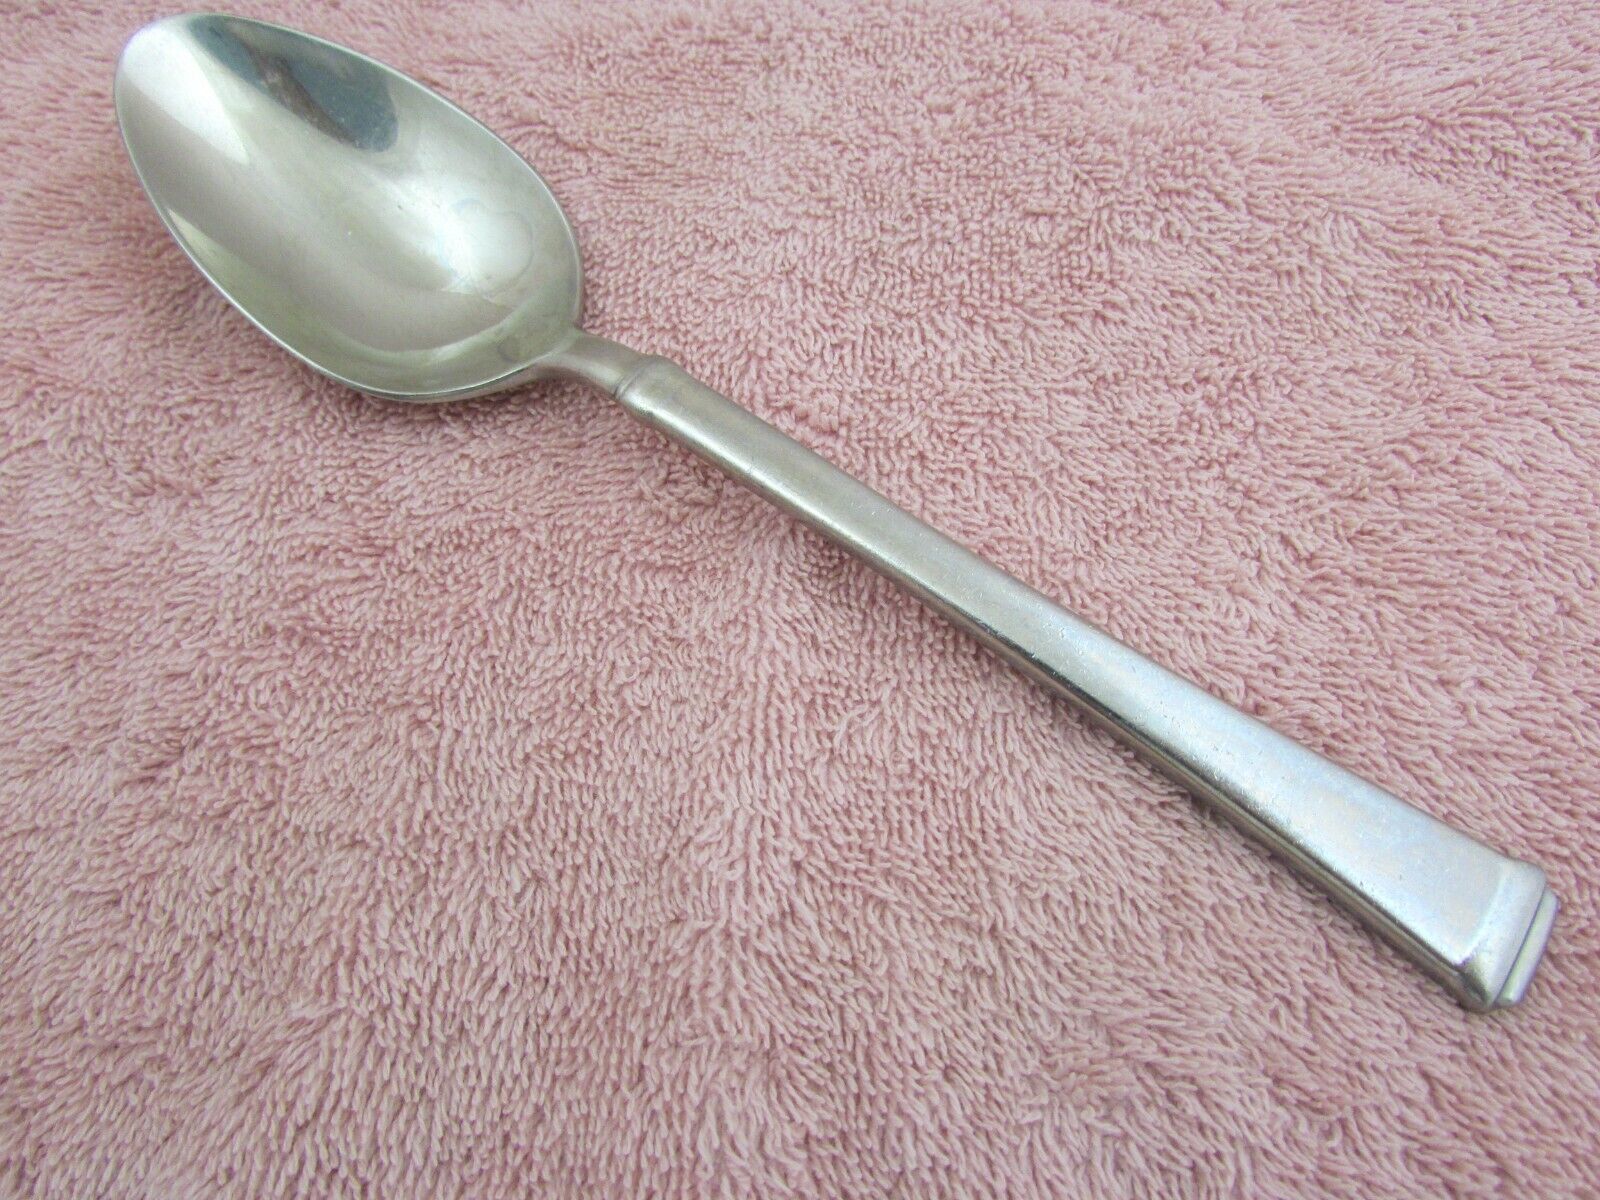 Mikasa stainless flatware Harmony glossy pattern 8" serving/table spoon - $8.16